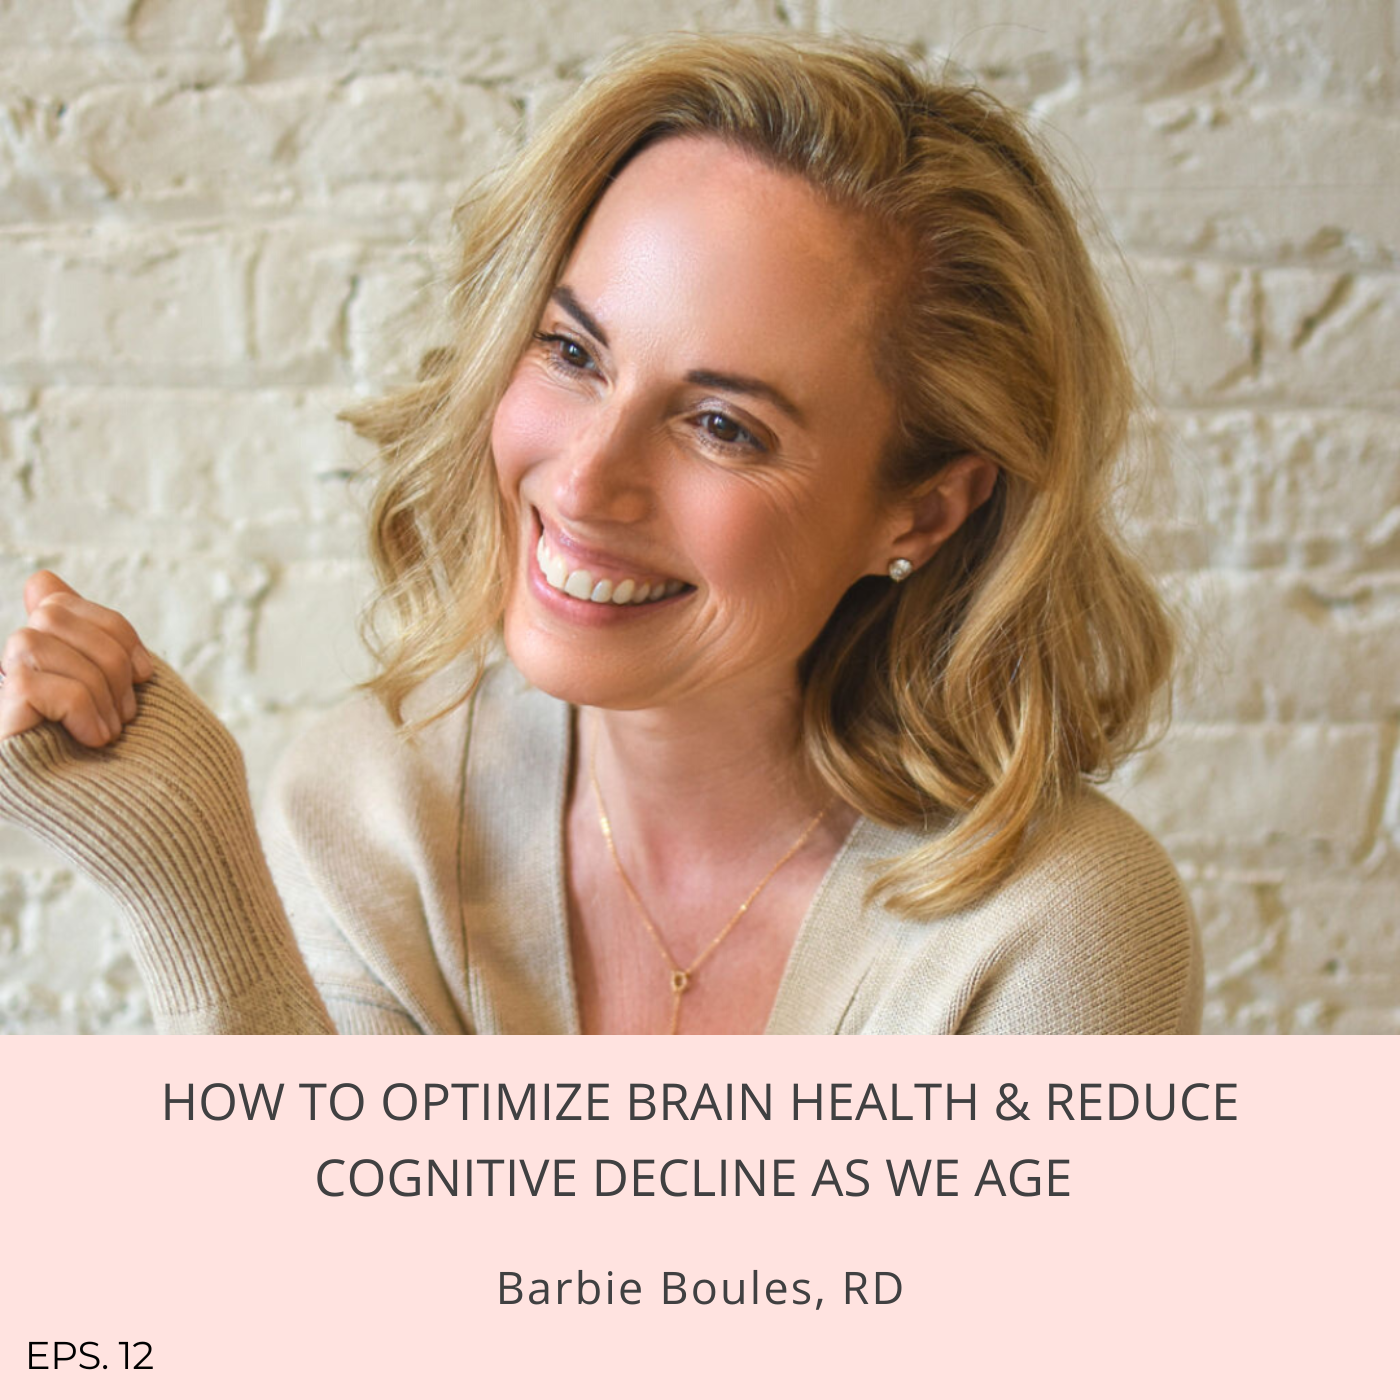 Episode 12: How to optimize brain health & reduce cognitive decline as we age with Barbie Boules, RD